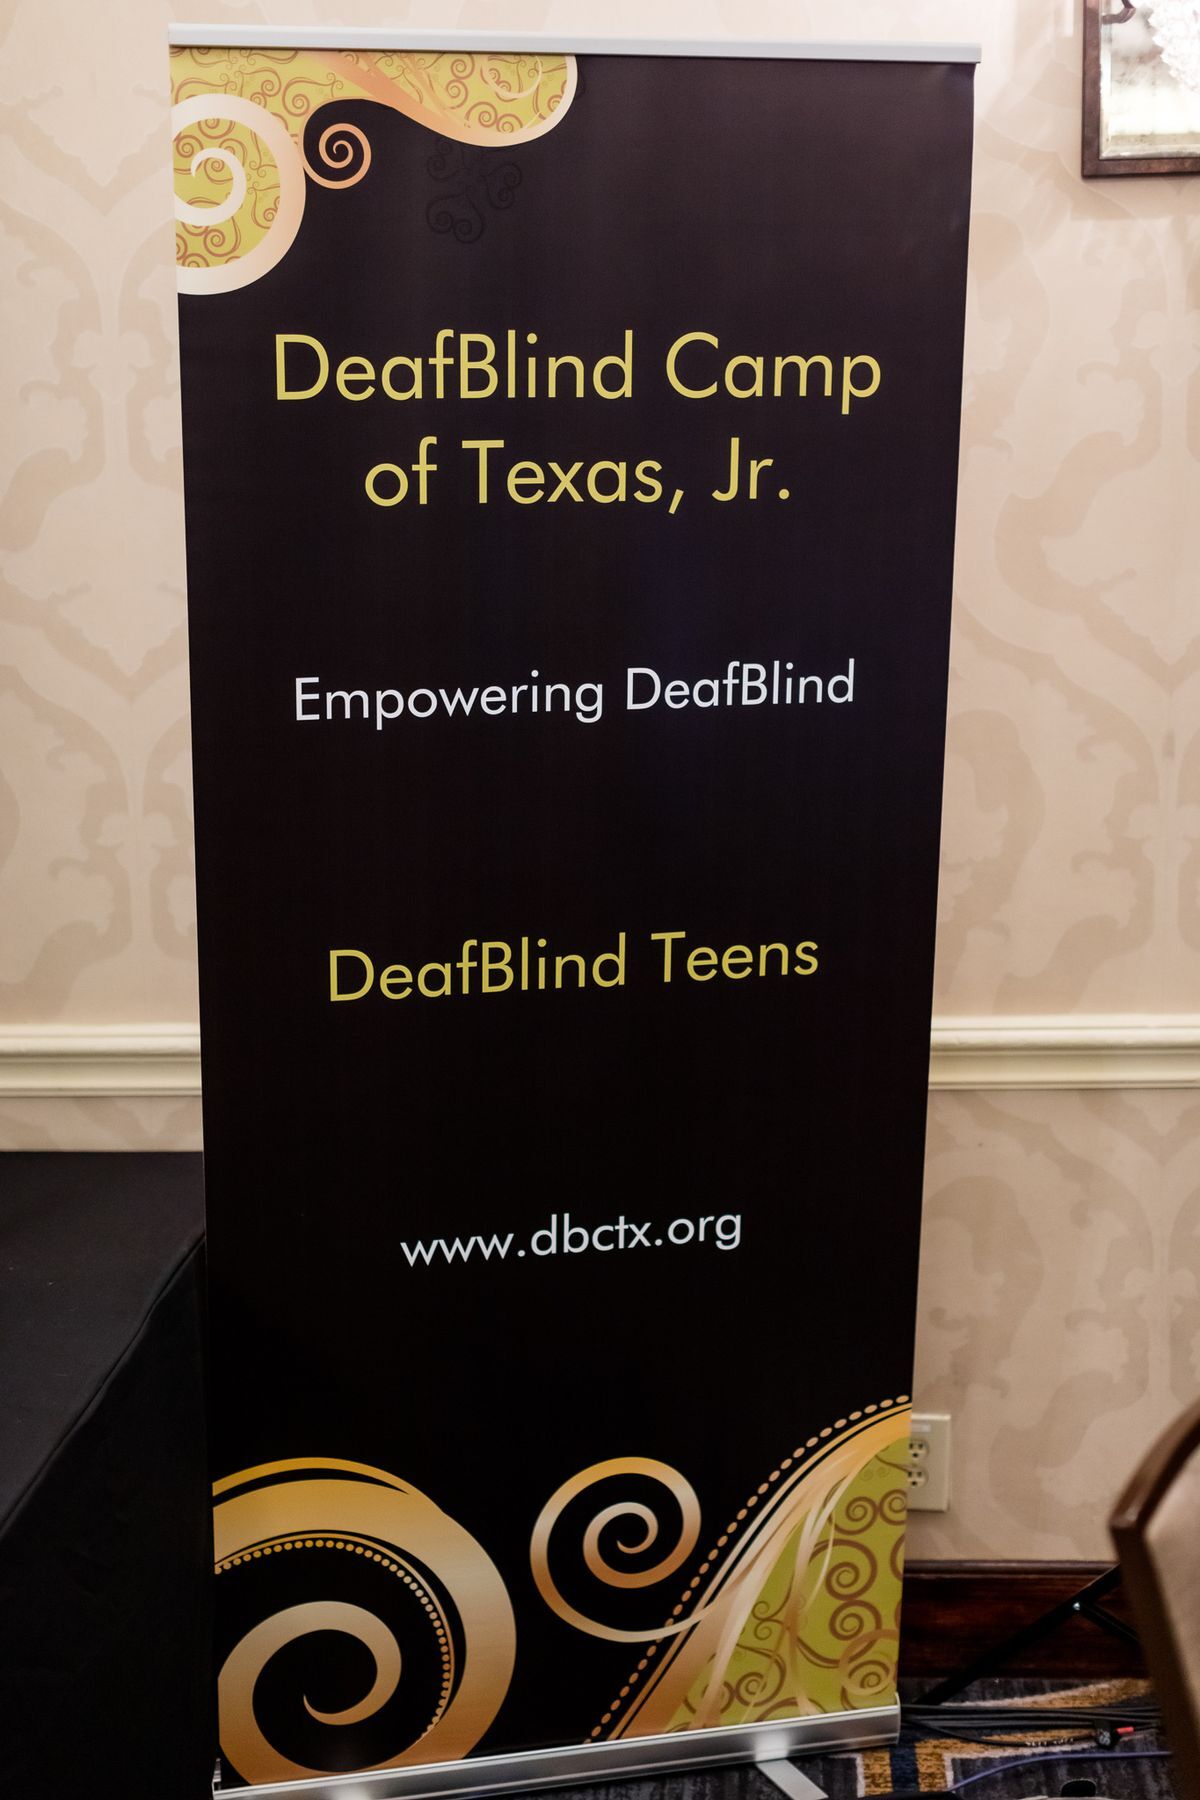 A stand up banner for DeafBlind Camp of Texas, Jr. Empowering DeafBlind. The website listed is www.dbctx.org